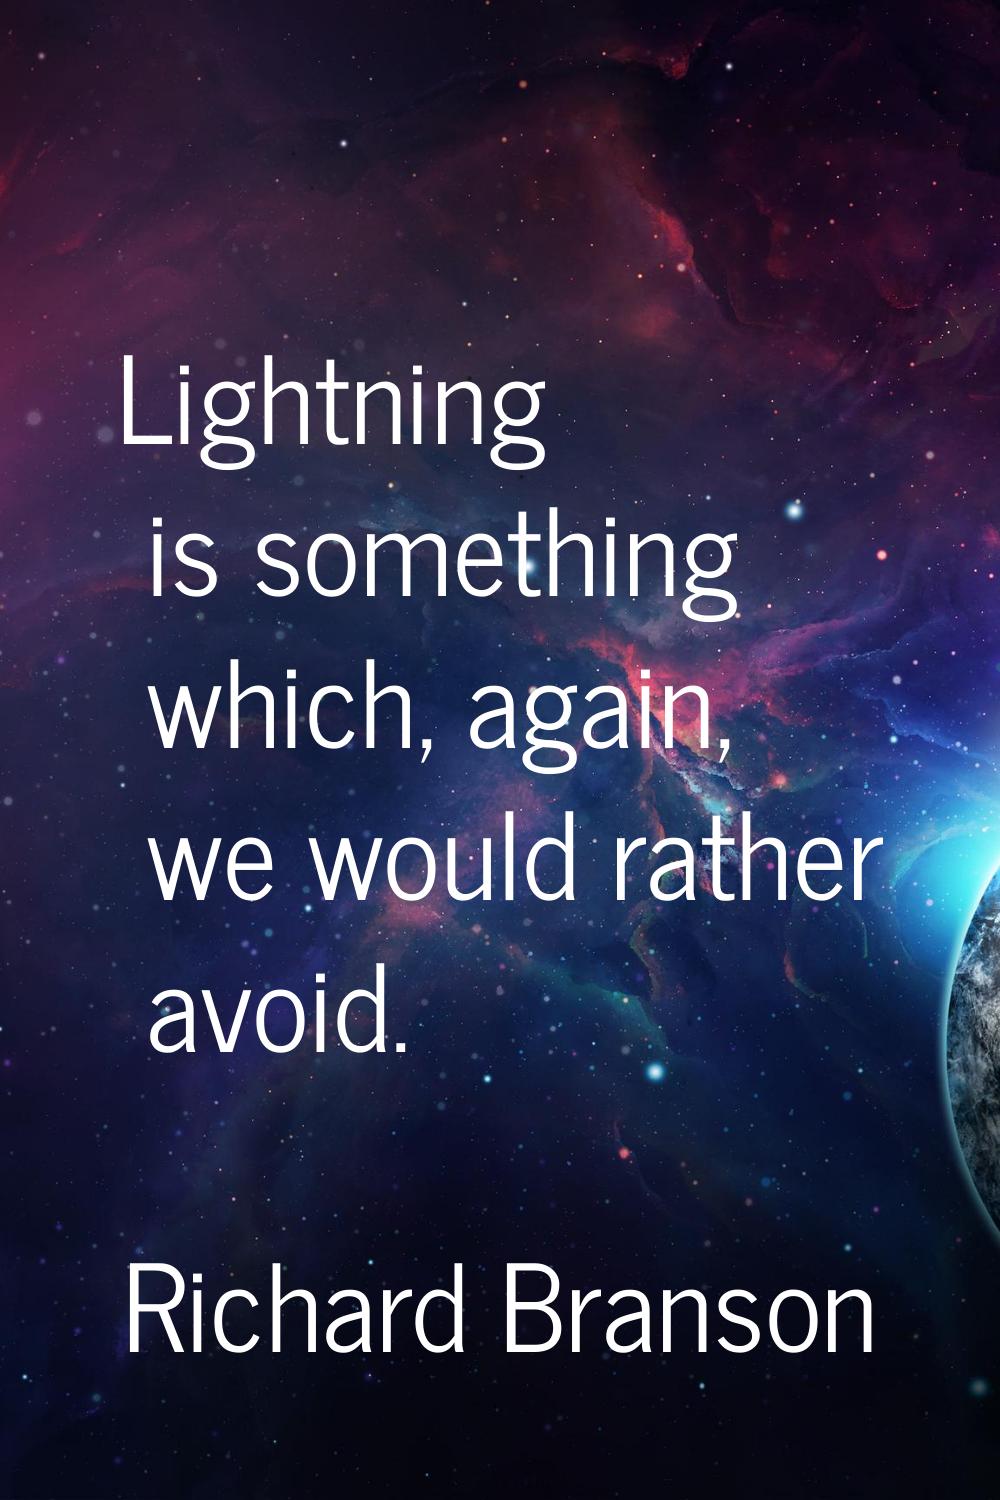 Lightning is something which, again, we would rather avoid.